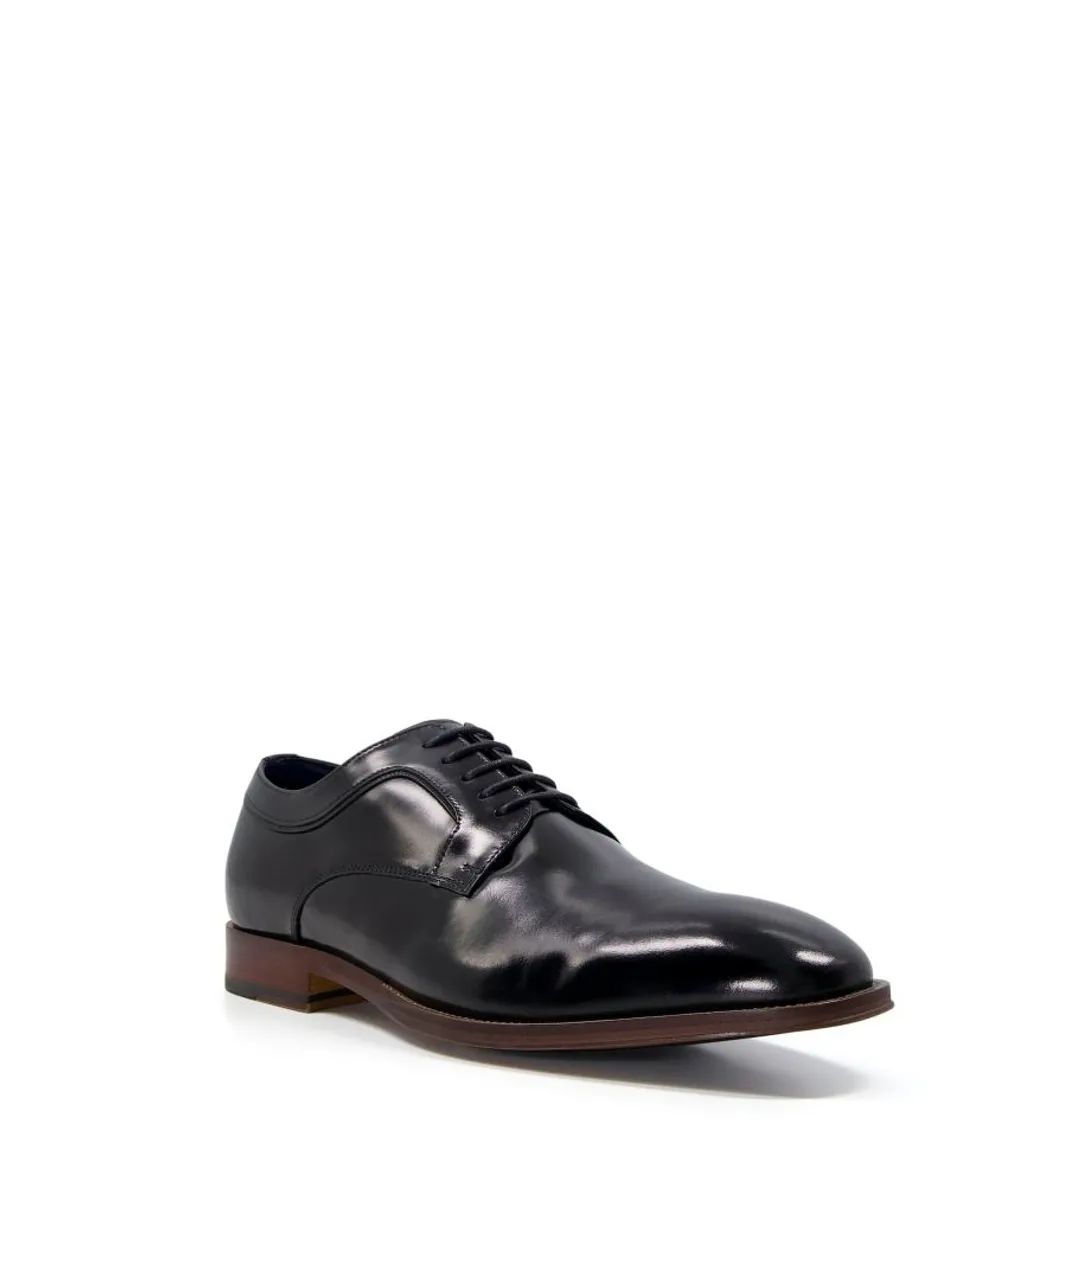 Dune London Mens WF SPARROWS Leather Lace-Up Gibson Shoes - Black (archived)